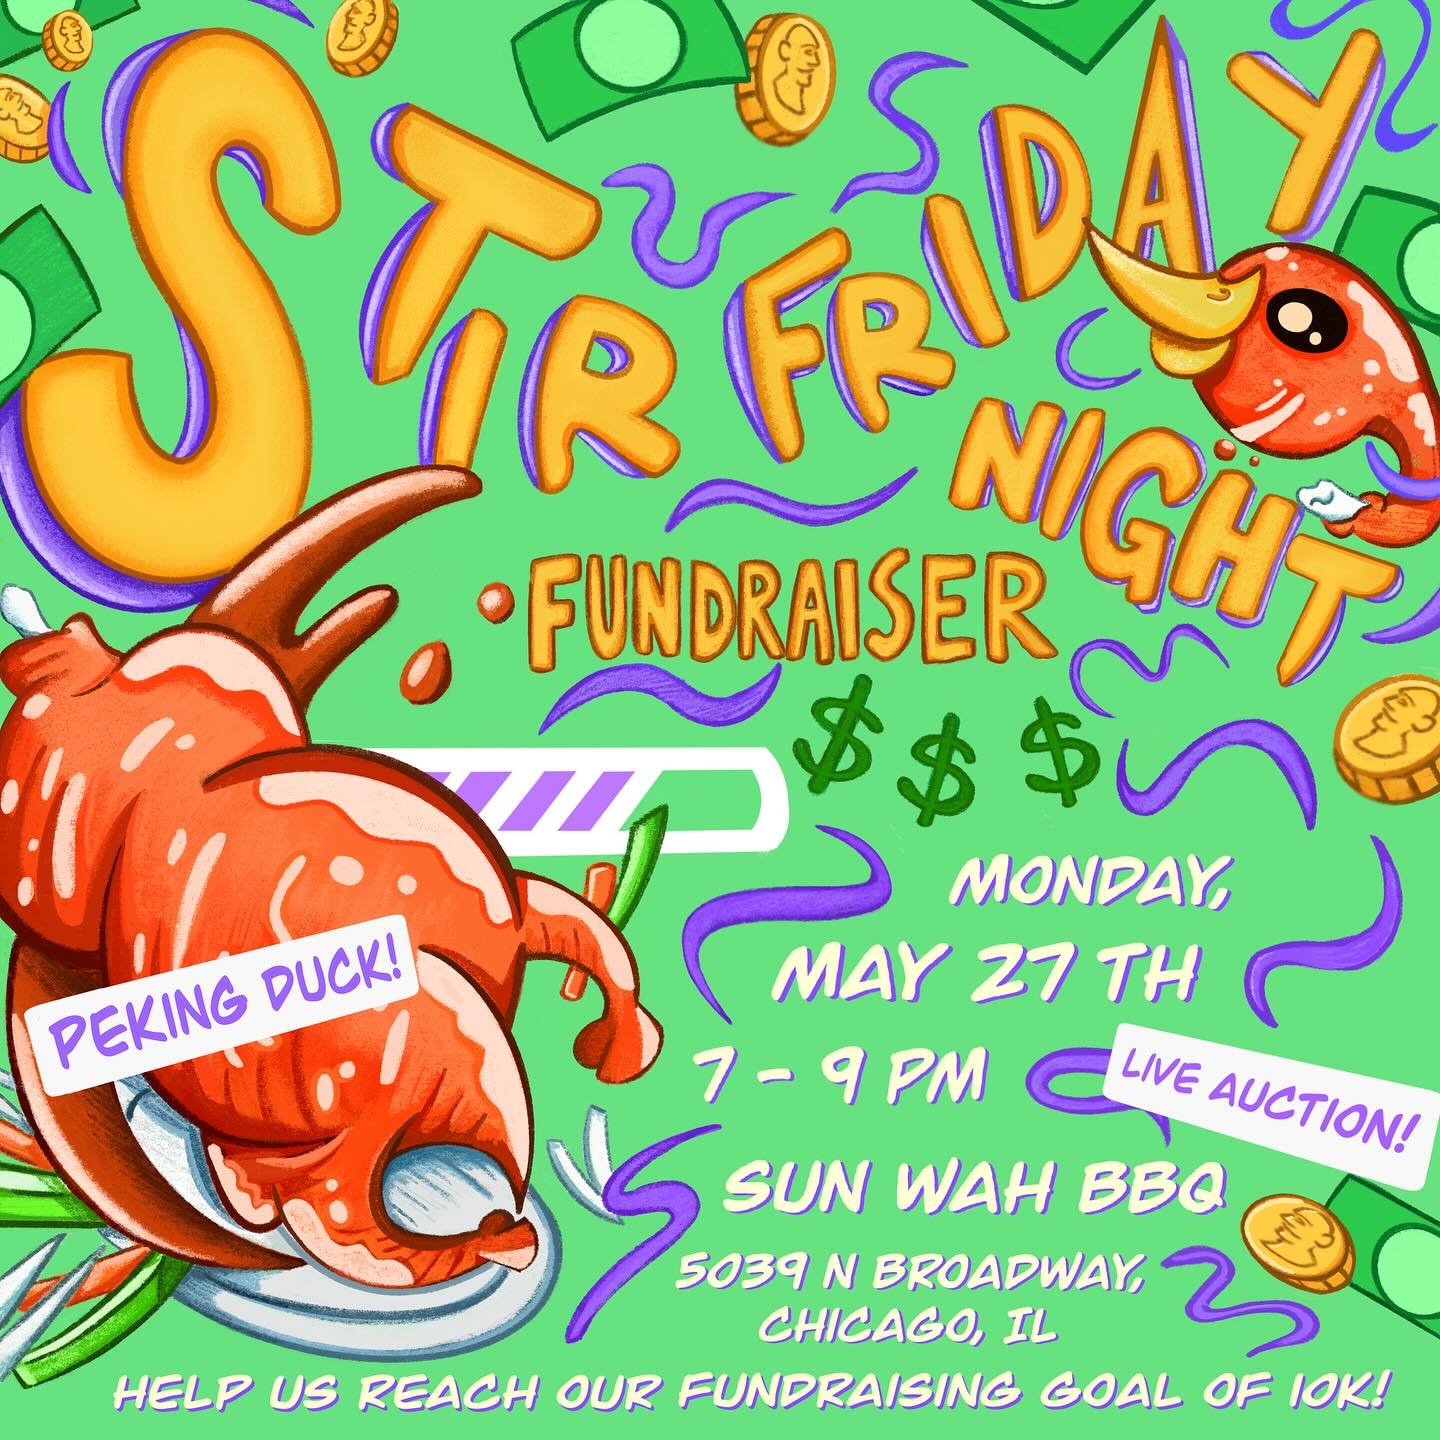 I know the Instagram fundraiser may not look like it, but with other donations directly to our PayPal via our website, we&rsquo;re about halfway to our goal!

This Memorial Day come dine with us and bid on some prizes to help us make a big push to ou